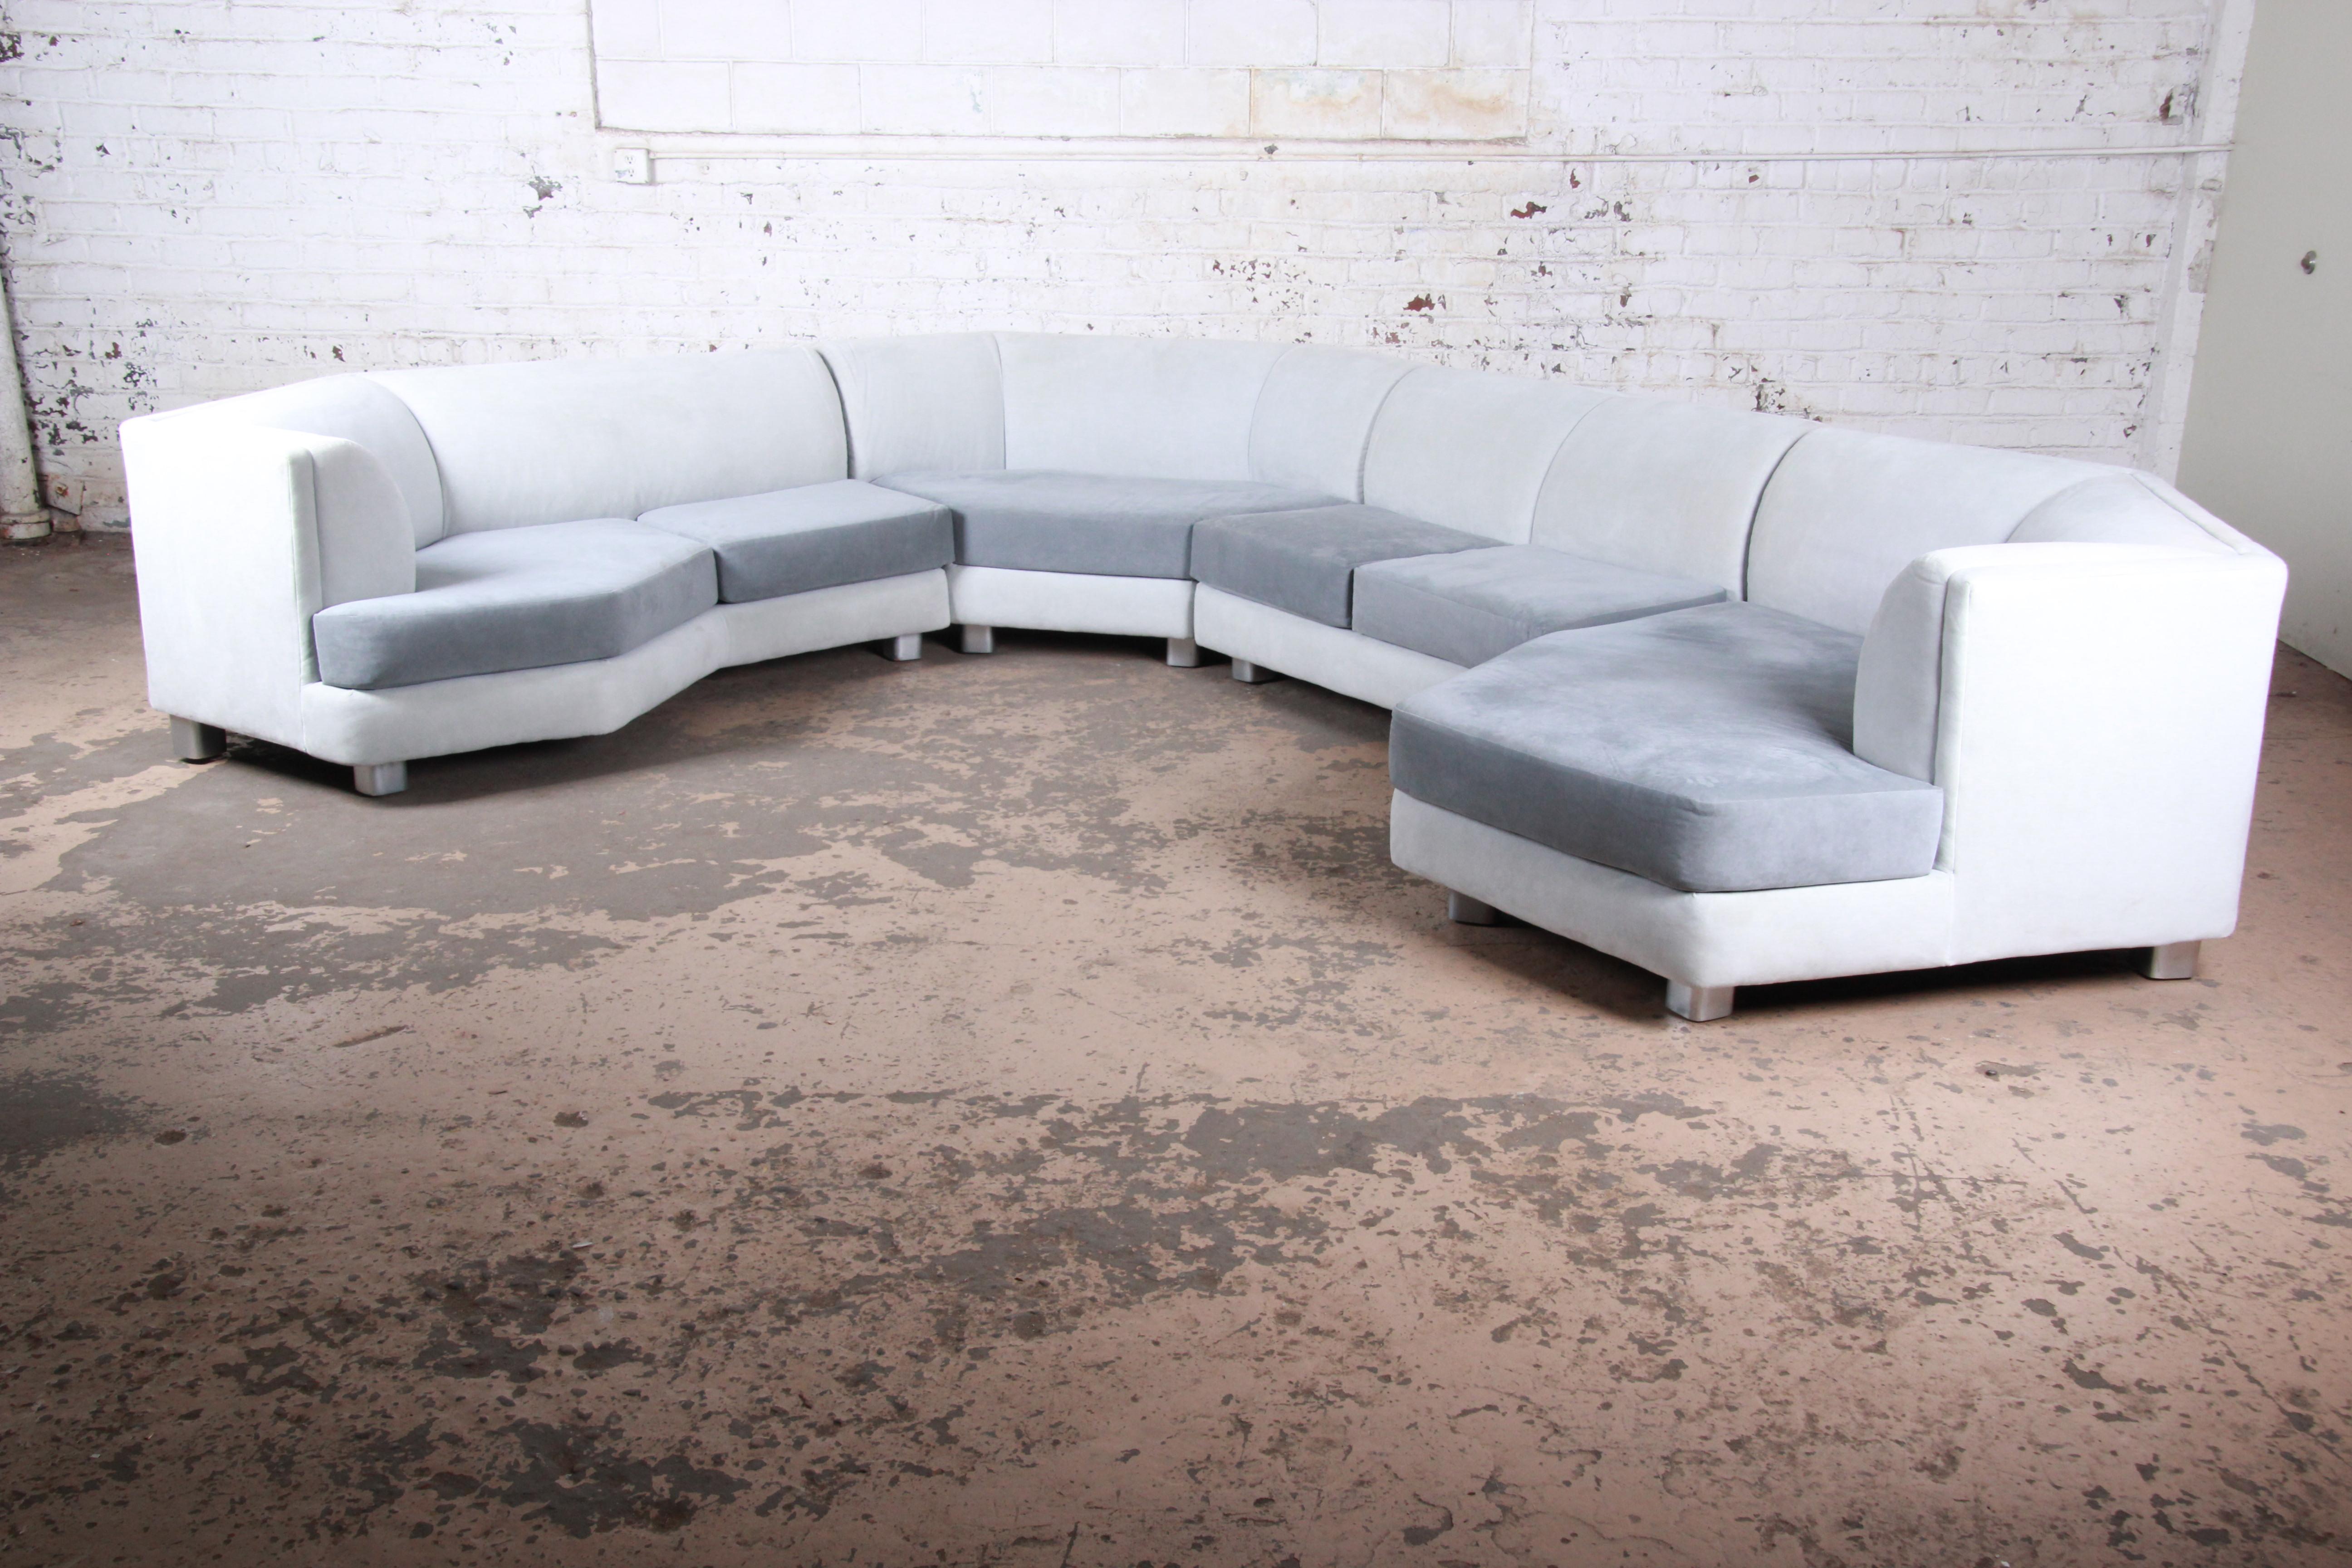 Modern four-piece sectional sofa

Designed by Milo Baughman for Thayer Coggin

USA, 1990s

Two-tone upholstery in light and dark gray and chrome feet

Measures: 163